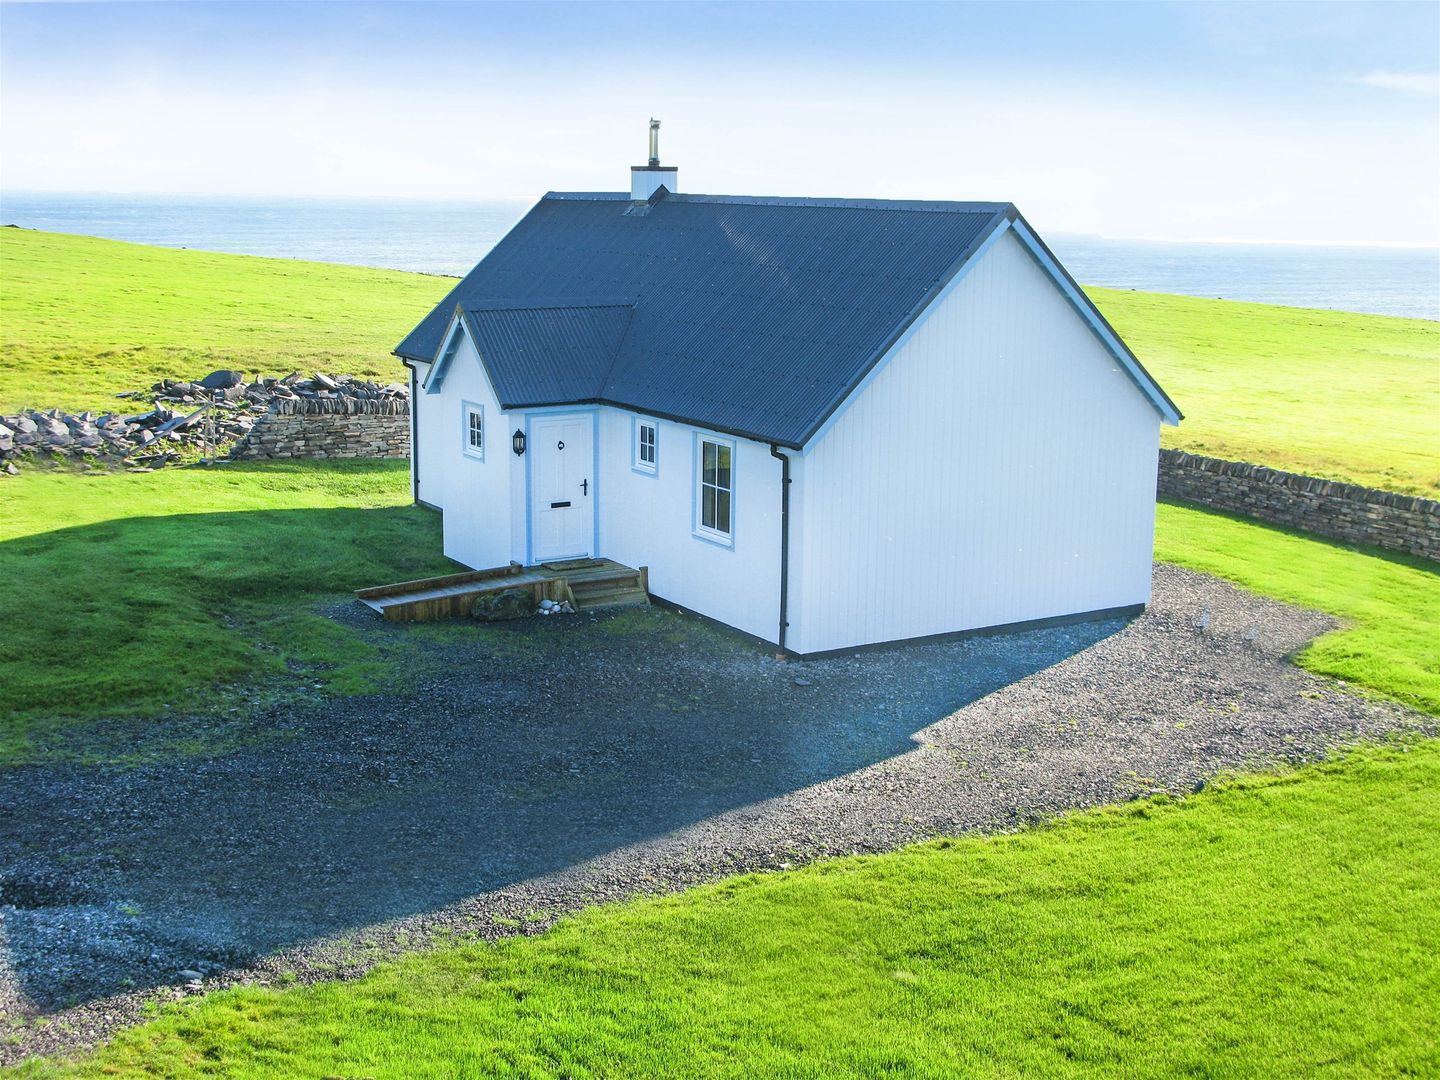 Two Bedroom Wee House - Caithness , The Wee House Company The Wee House Company Casas clásicas